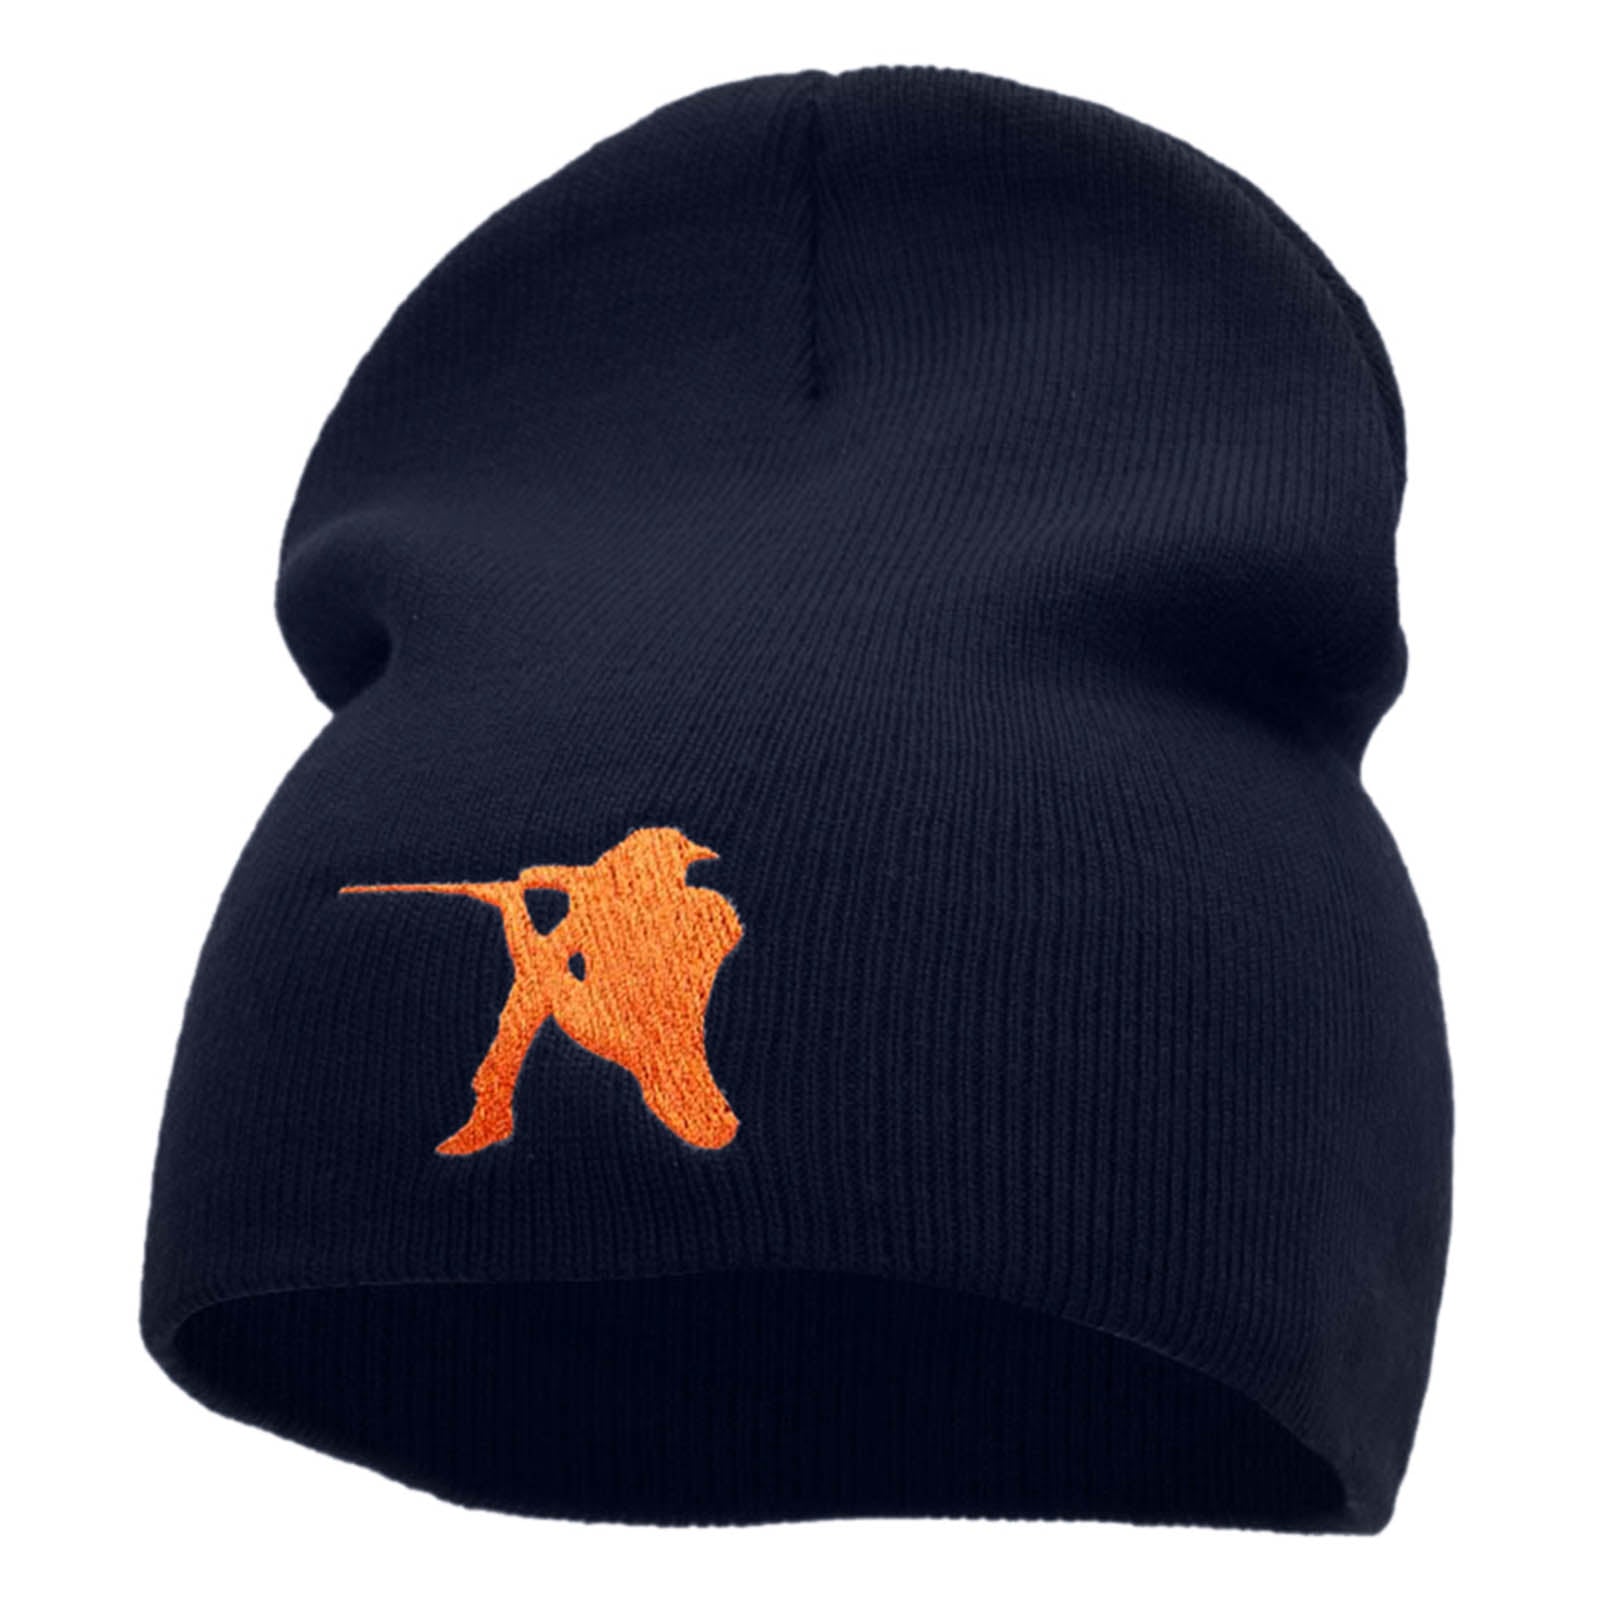 Hunter Taking A Shot Embroidered 8 Inch Short Beanie - Navy OSFM